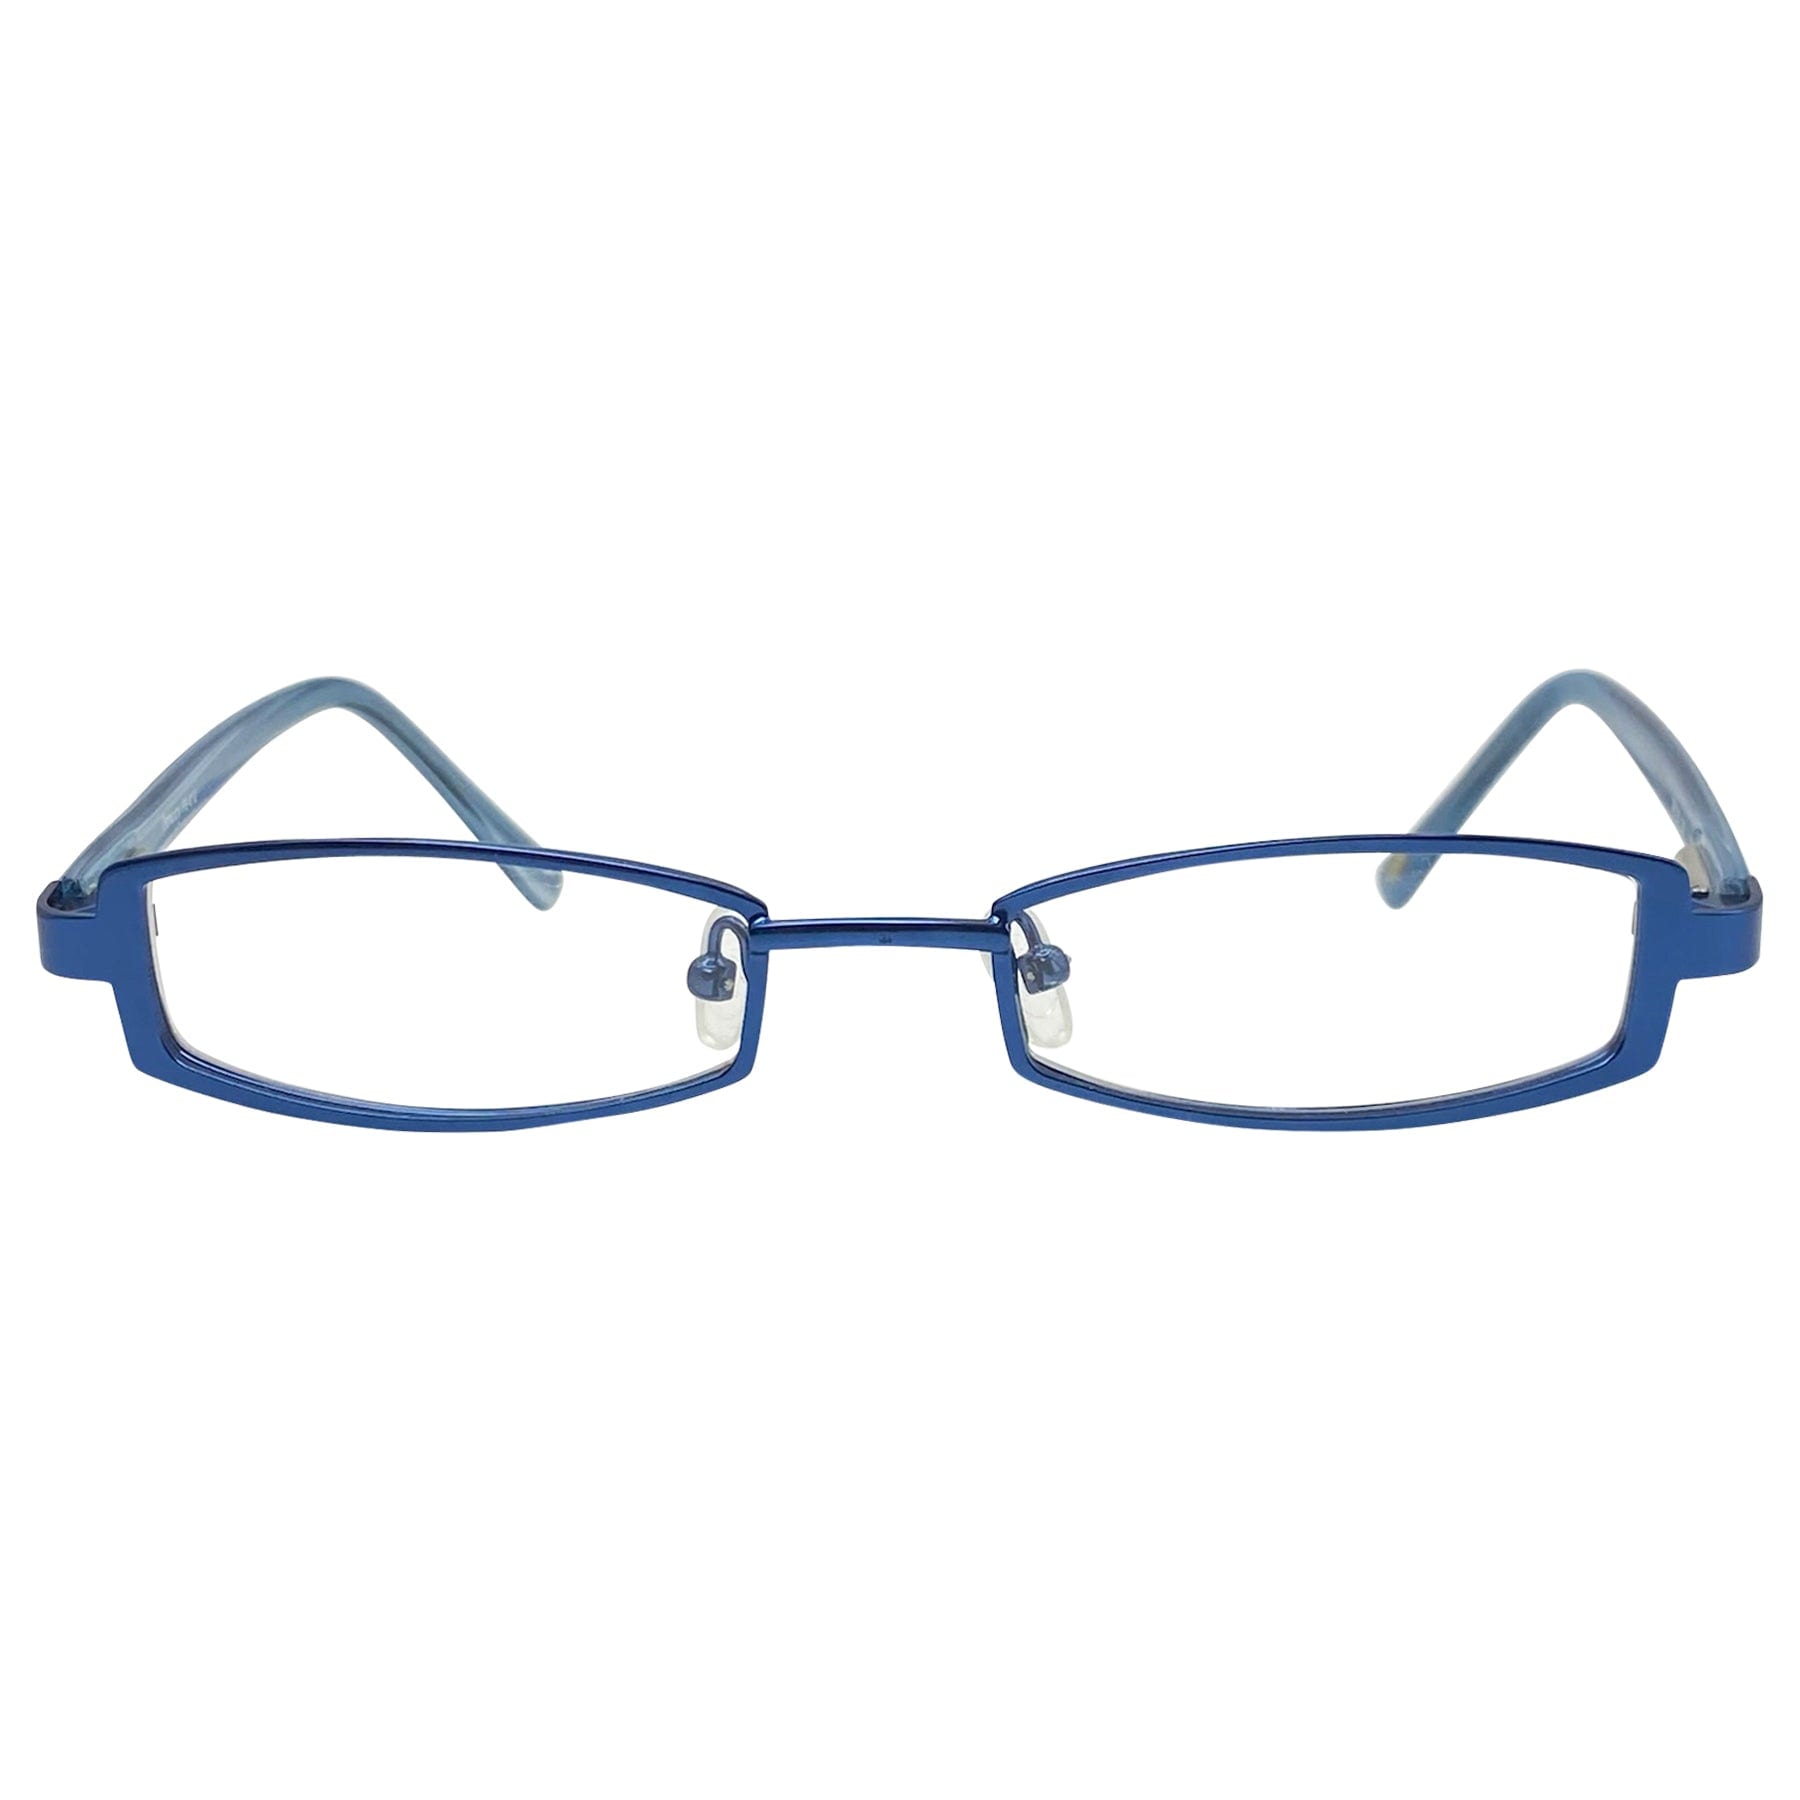 Colored glasses with a blue metal rectangular frame and a 90s style